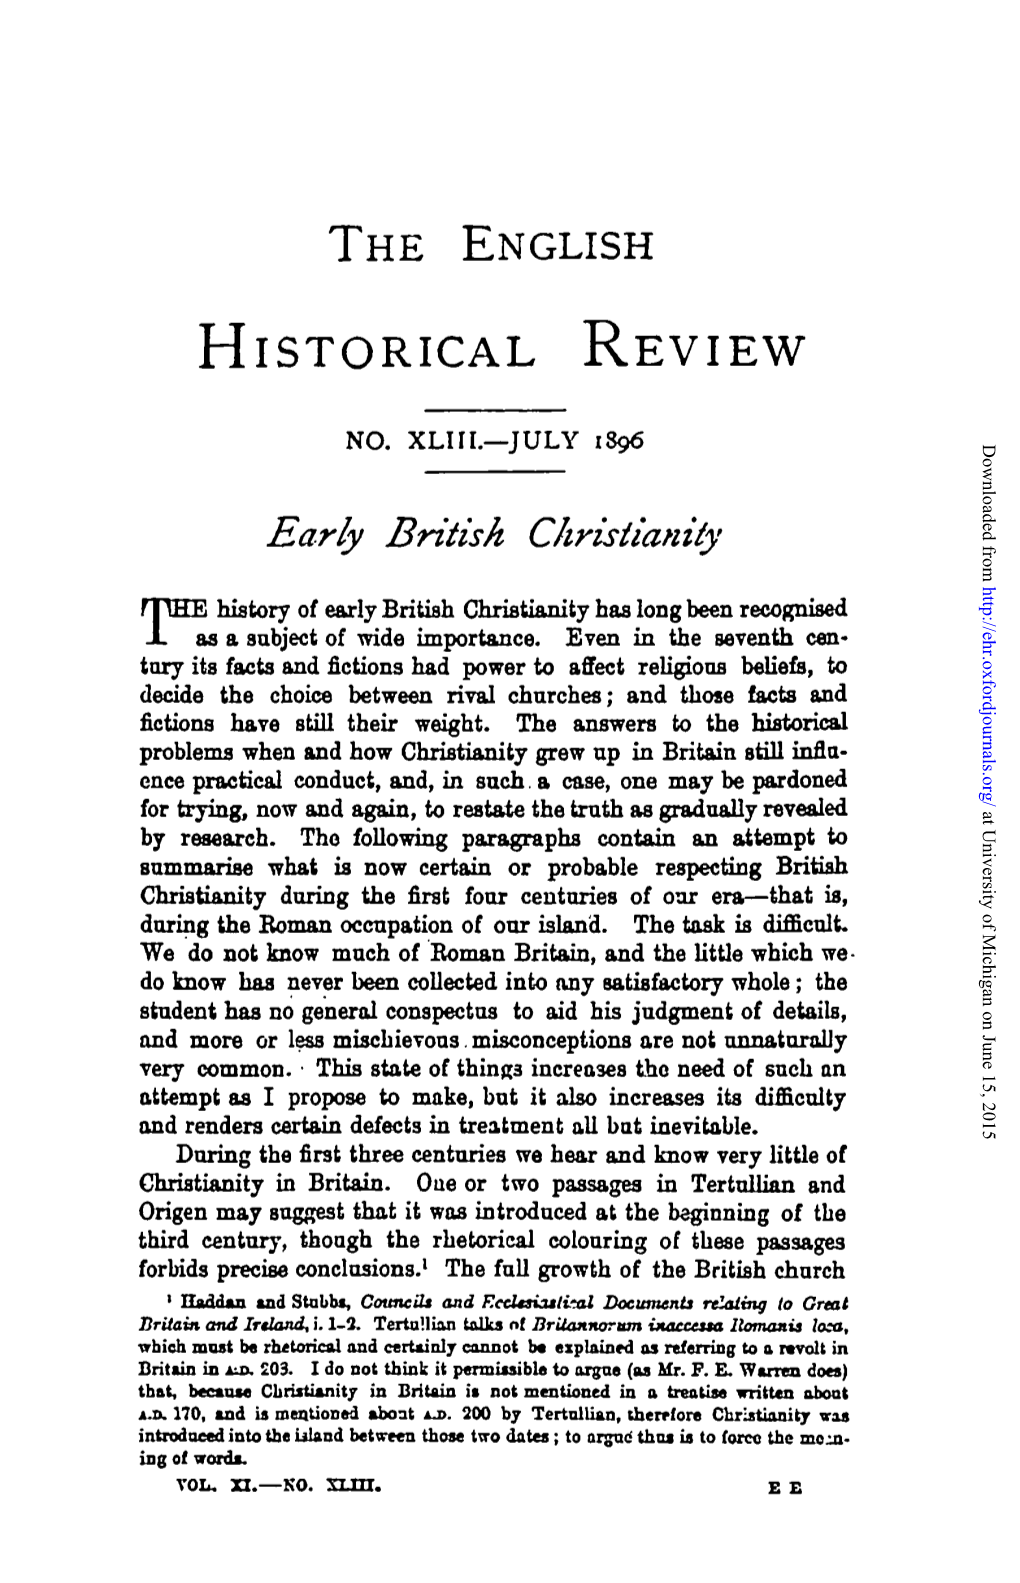 Early British Christianity FREE History of Early British Christianity Has Long Been Recognised JL As a Subject of Wide Importance